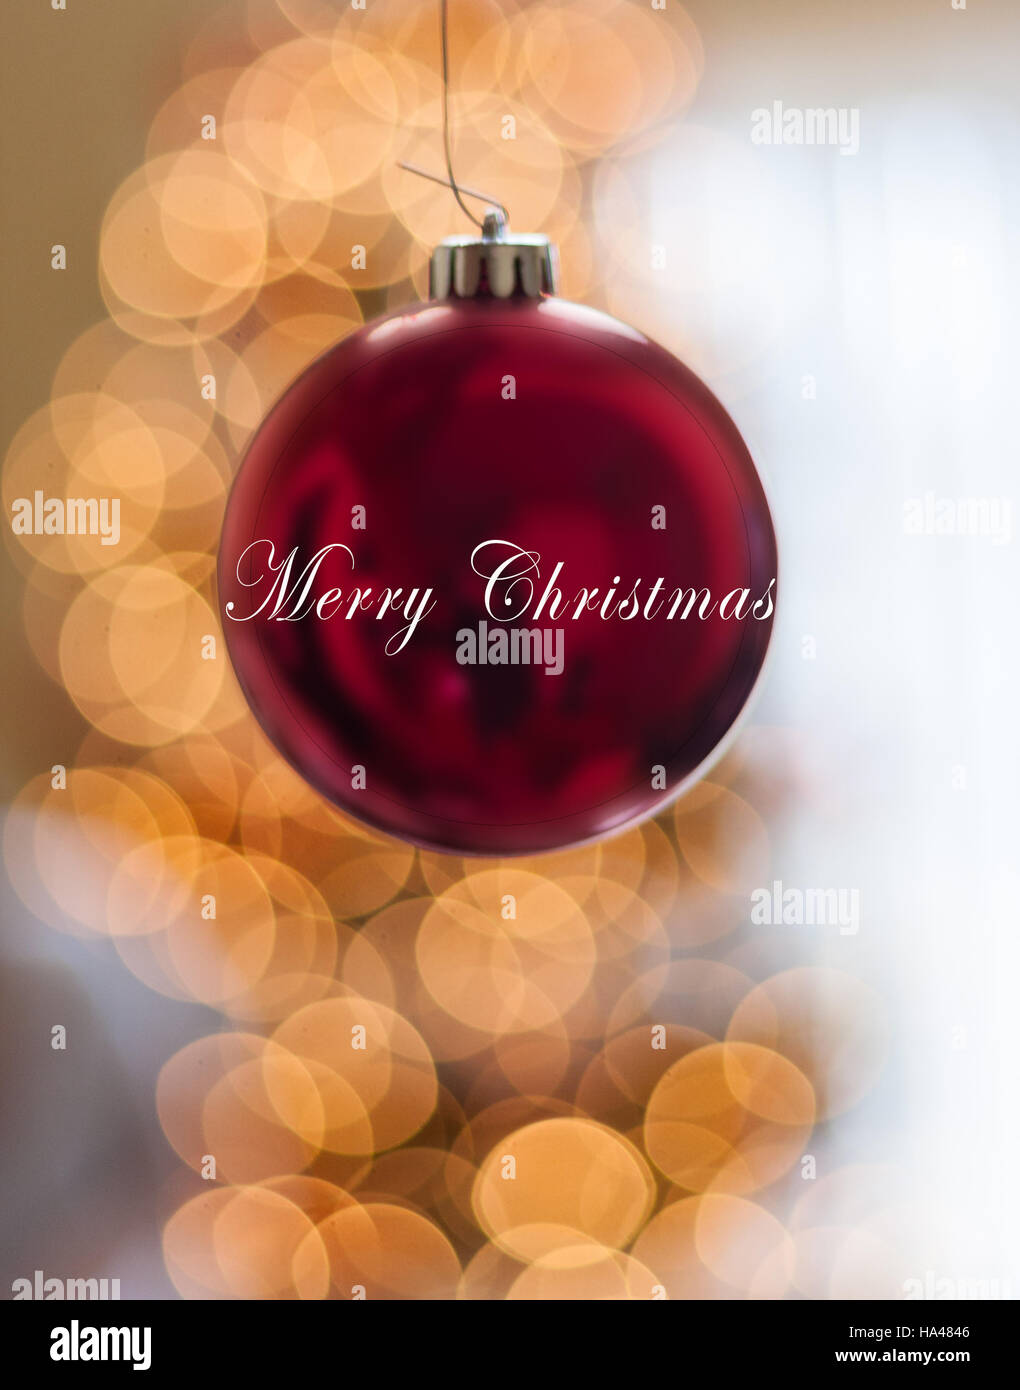 Single Red Happy Holidays Ornament hanging in front of lights Stock Photo